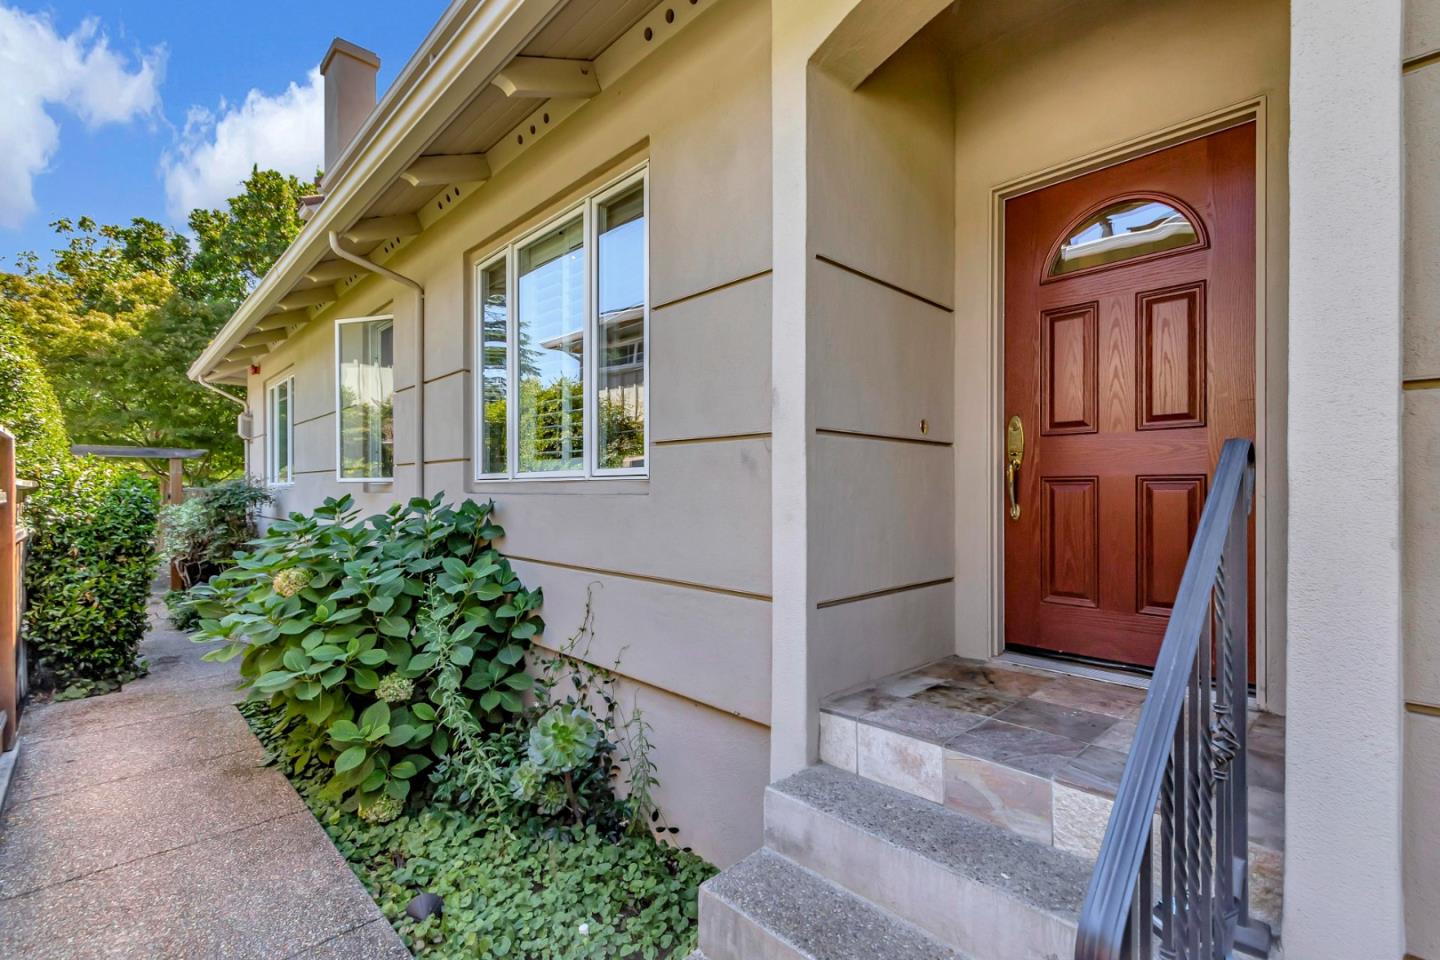 Come and see this beautiful two story town home in a great location!  Located in the heart of Silicon Valley and a short distance to tech companies like Apple, Google, Facebook and Stanford University, this Luxurious 2 bedroom, 2.5 bath townhome is just one block from Los Altos Village. Features include Attached 2-car side by side garage, In-unit washer and dryer, both bedrooms with en suite bathrooms.Excellent Los Altos schools: Covington, Egan and Los Altos High. Enjoy downtown amenities all within a few blocks.